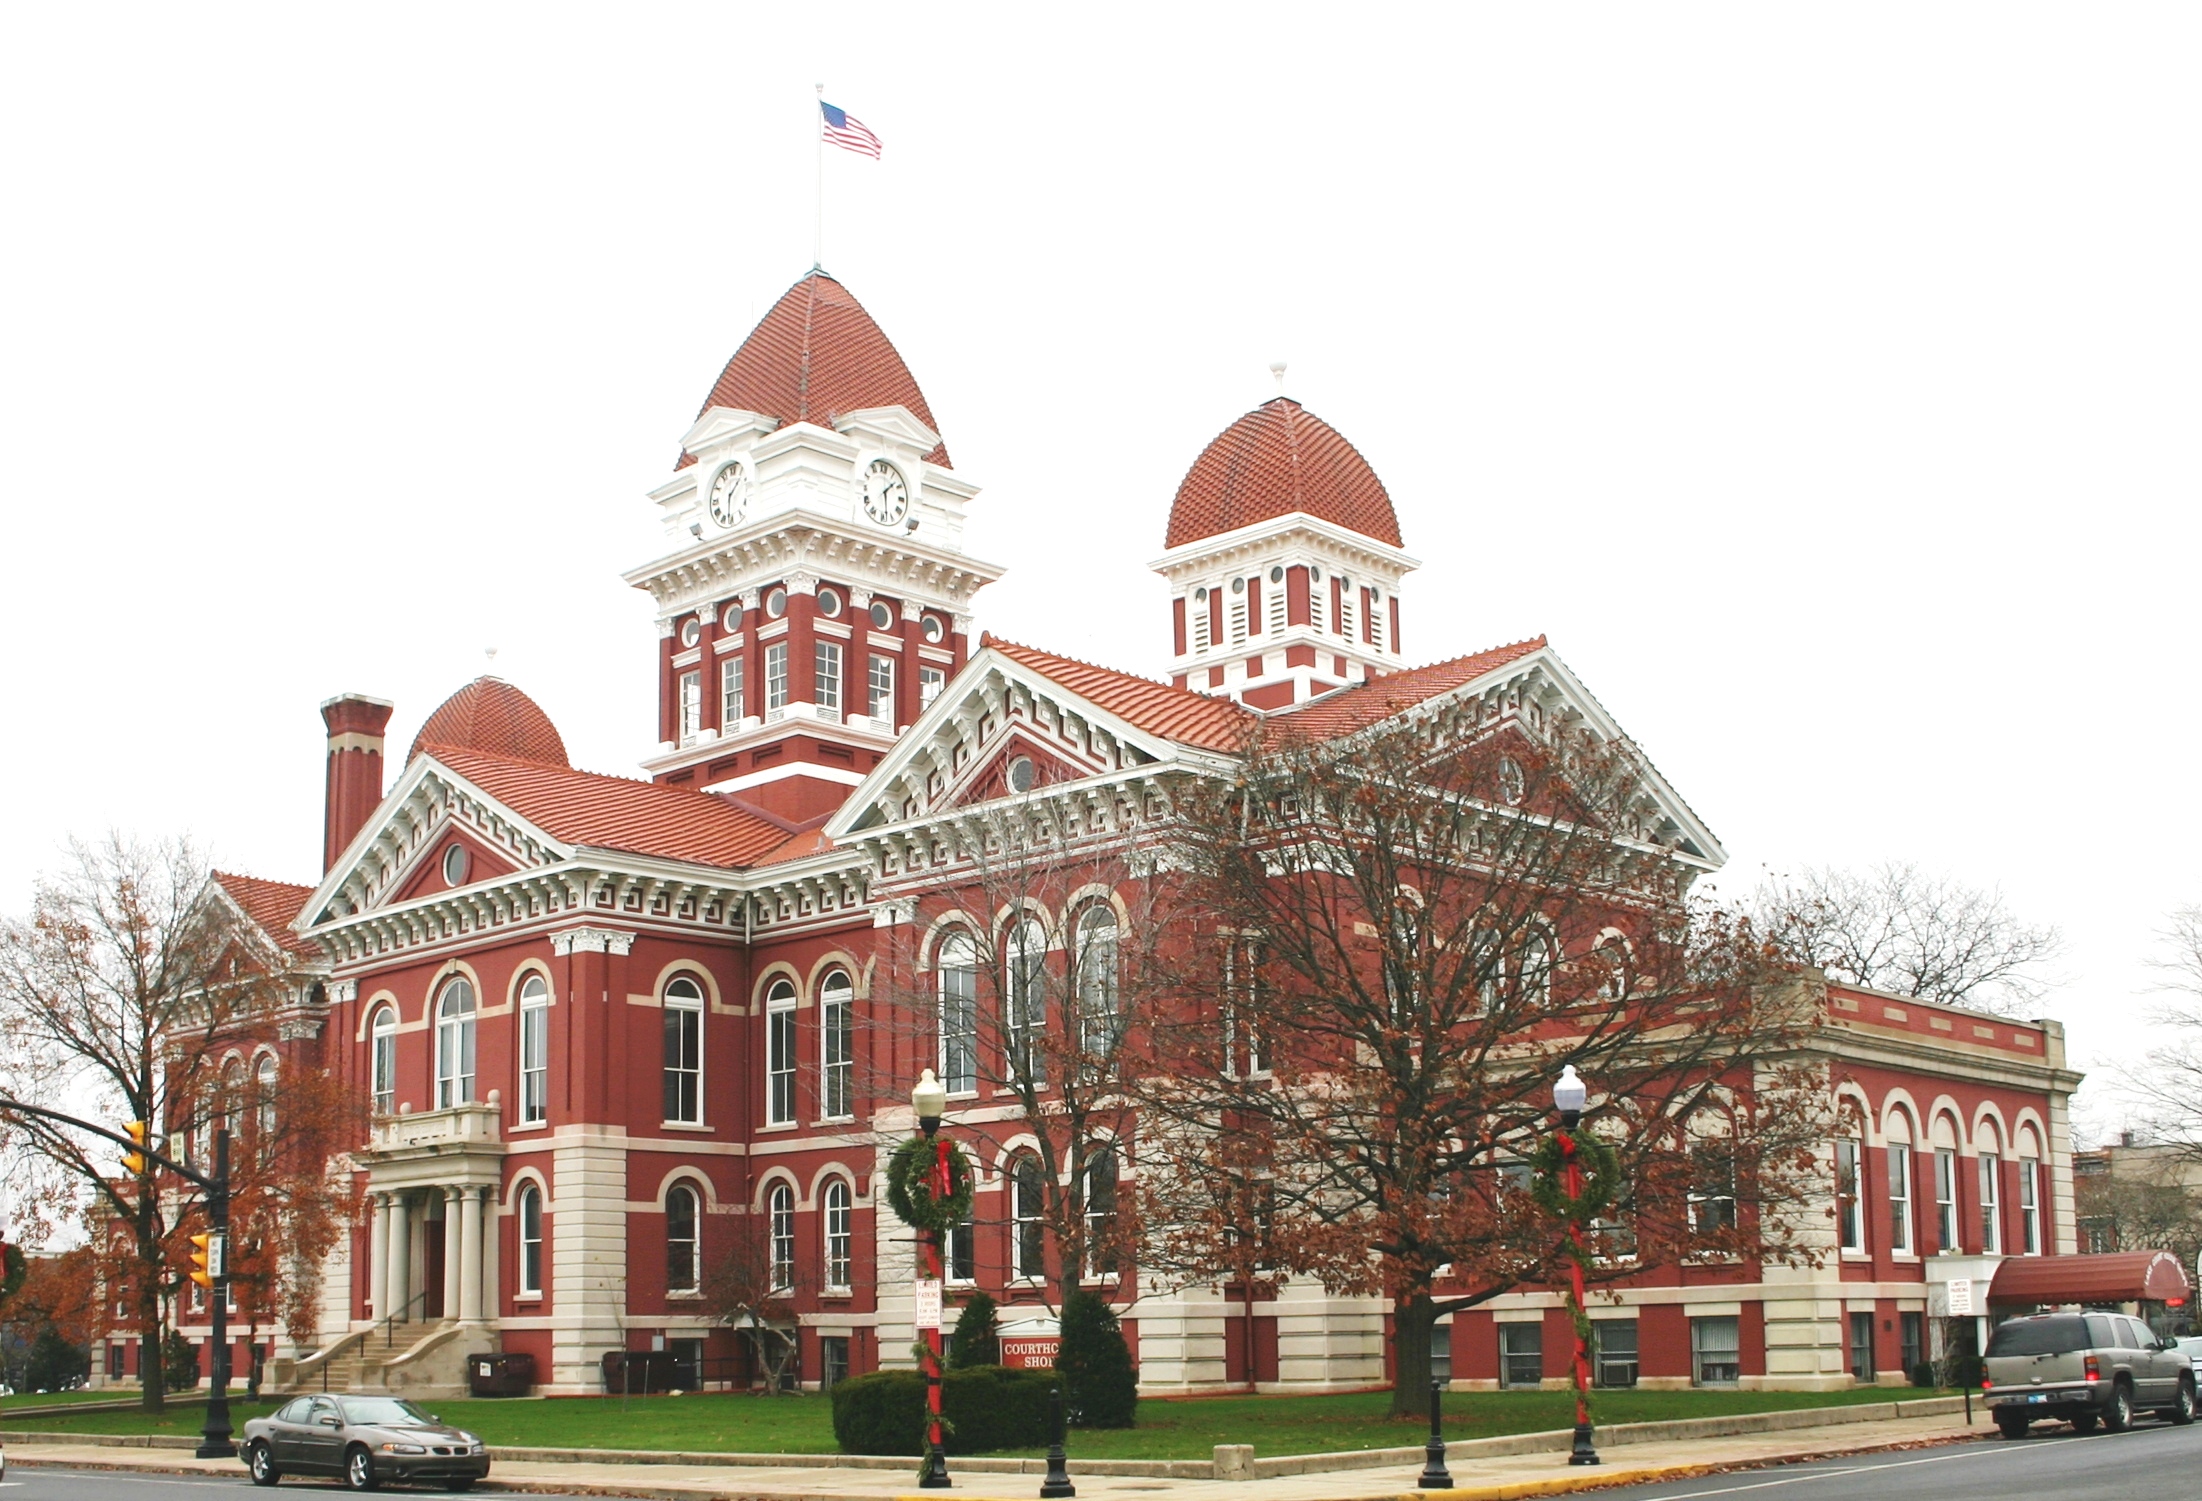 The ornate Lake County Courthouse, affectionately referred to as the "Grand Old Lady," has been a landmark in Crown Point, Indiana, since 1878.